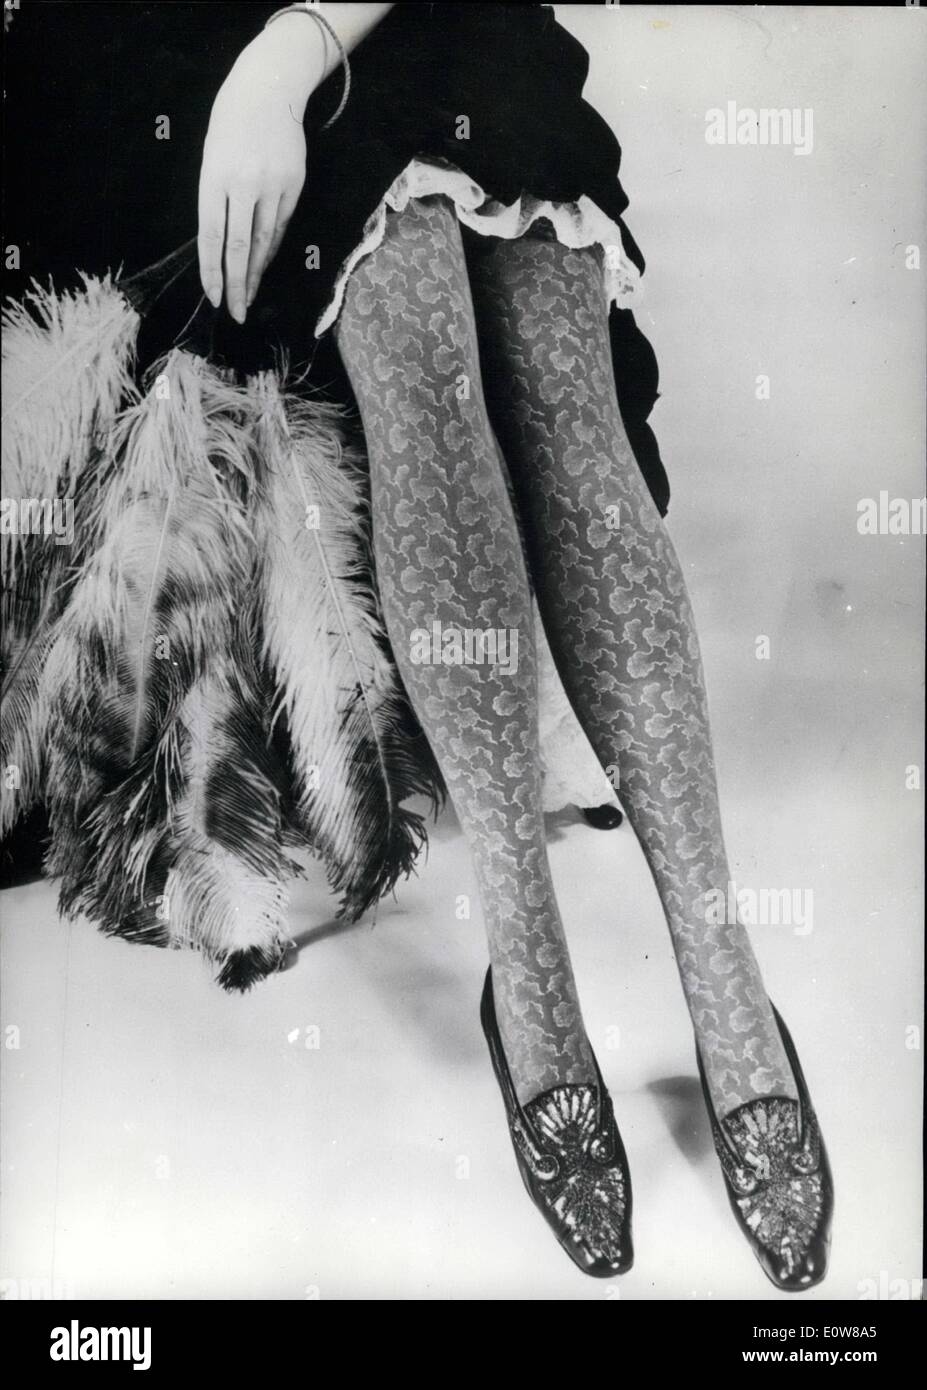 Jan. 01, 1962 - Stockings a la Egypt Jacquard design and hand printed designs on stockings are the dernier cri in the stocking fashion. The firm ''Elbeo'' is launching this most unusual kind of stocking which - perhaps - will soon be seen more frequently. Stock Photo